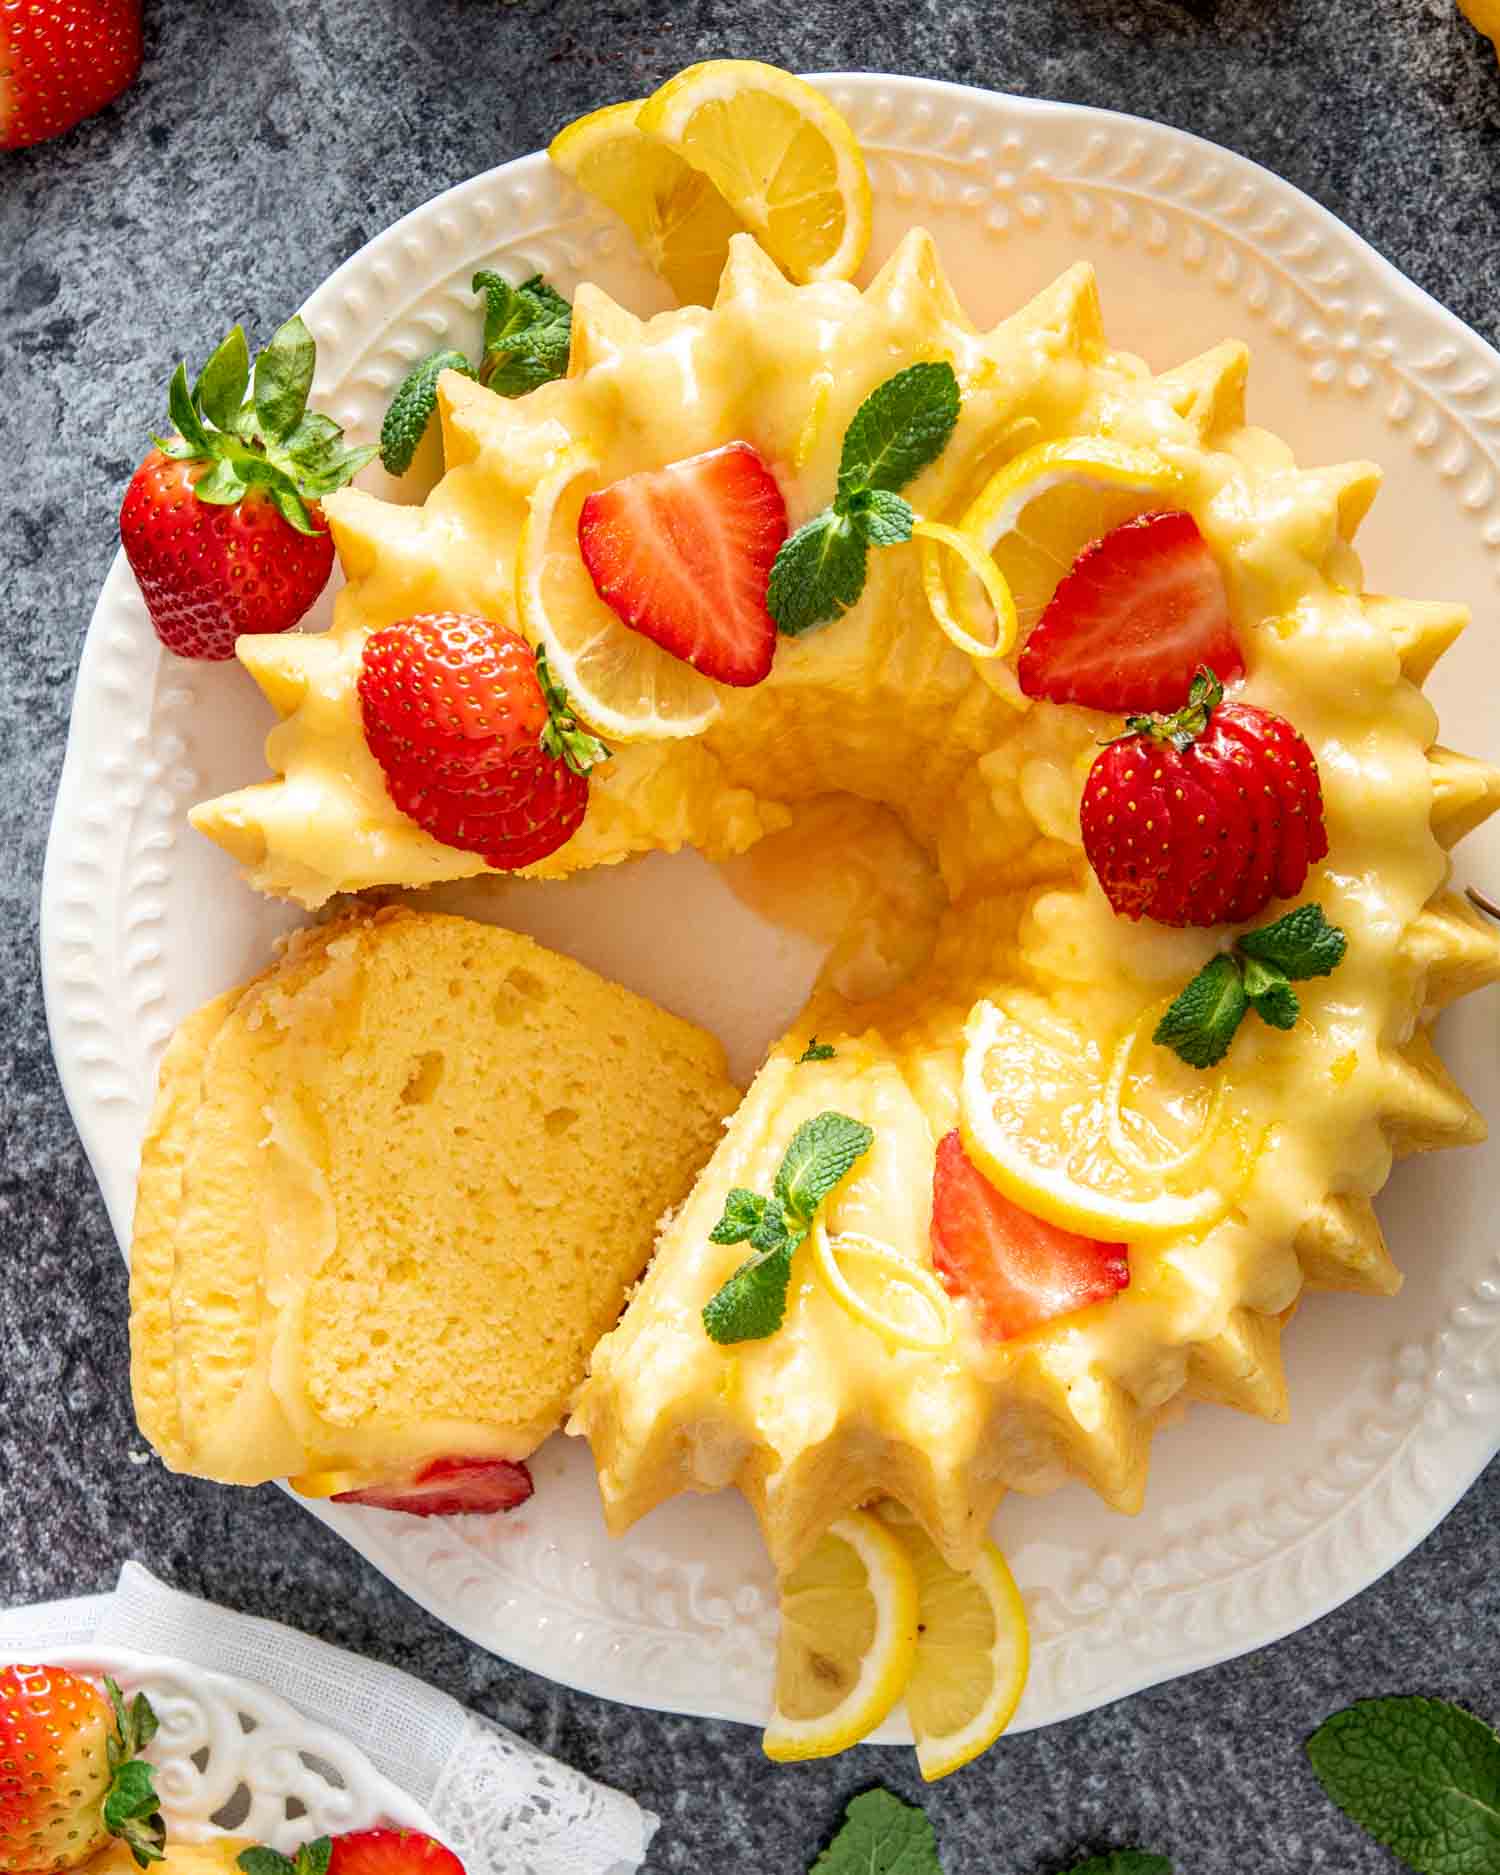 a lemon chiffon cake on a platter garnished with lemon slices and strawberries.